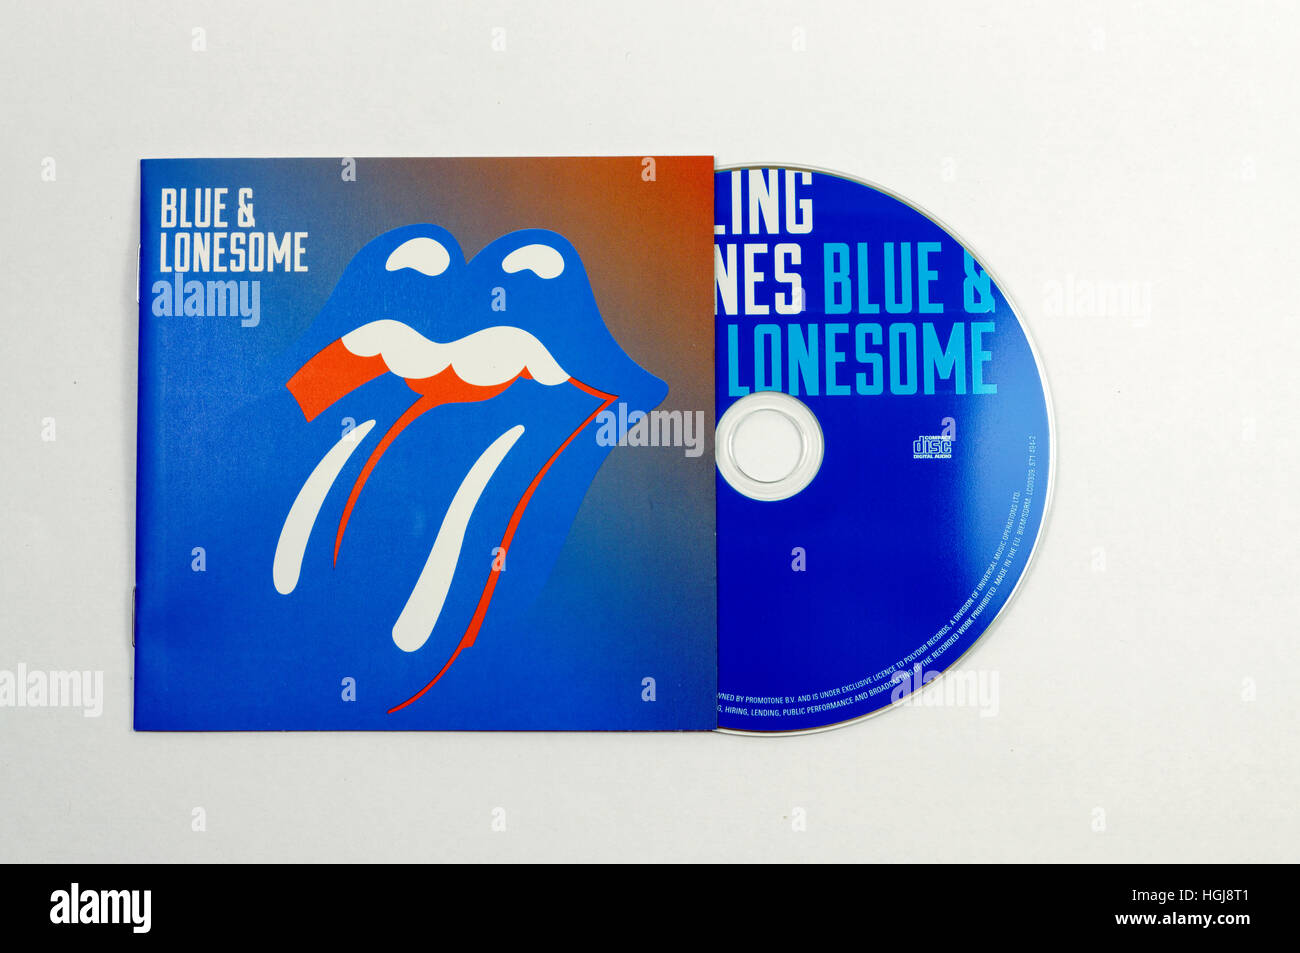 Rolling Stones Blue and Lonesome album. Stock Photo